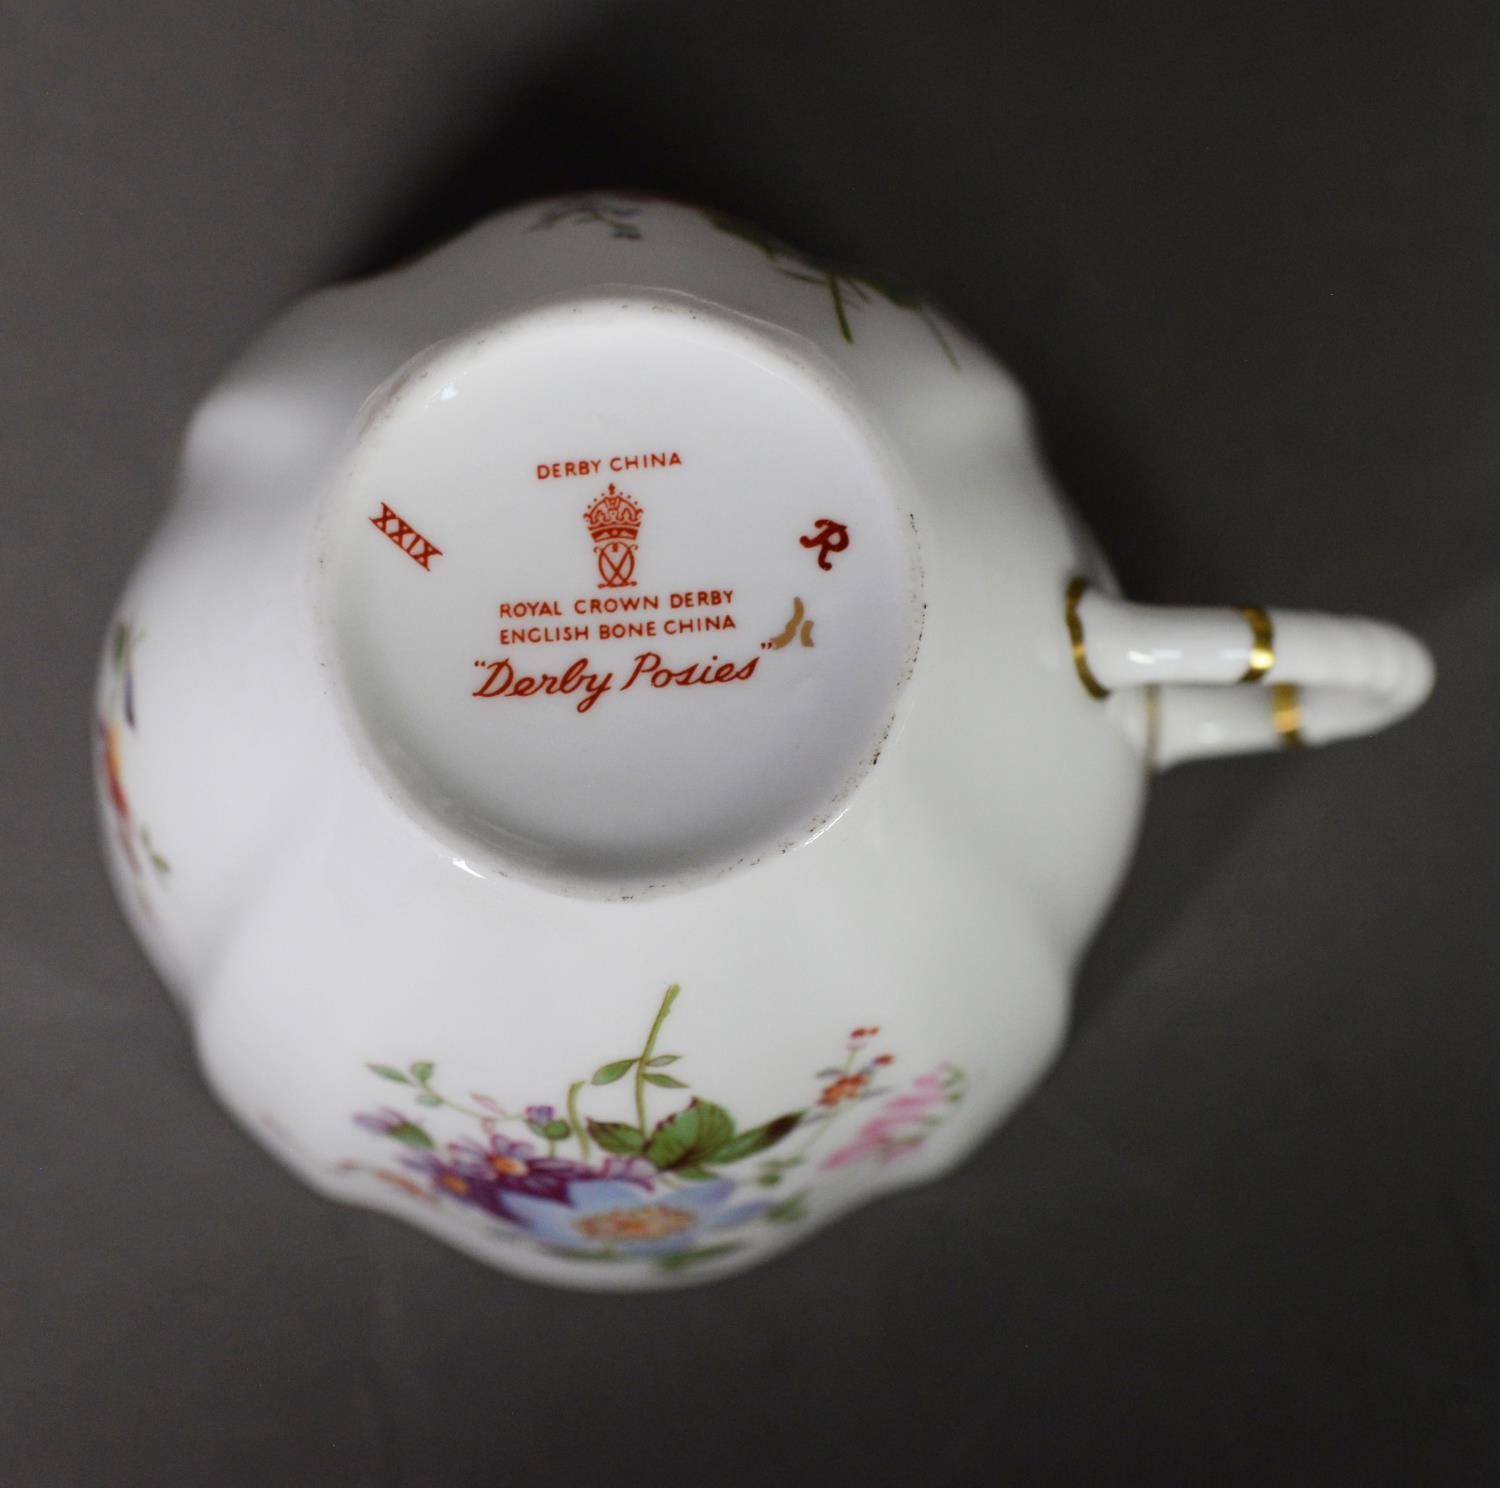 ROYAL CROWN DERBY - DERBY POSIES PATTERN ENGLISH BONE CHINA TEA-FOR-TWO SERVICE of 8 pieces, viz a - Image 3 of 3